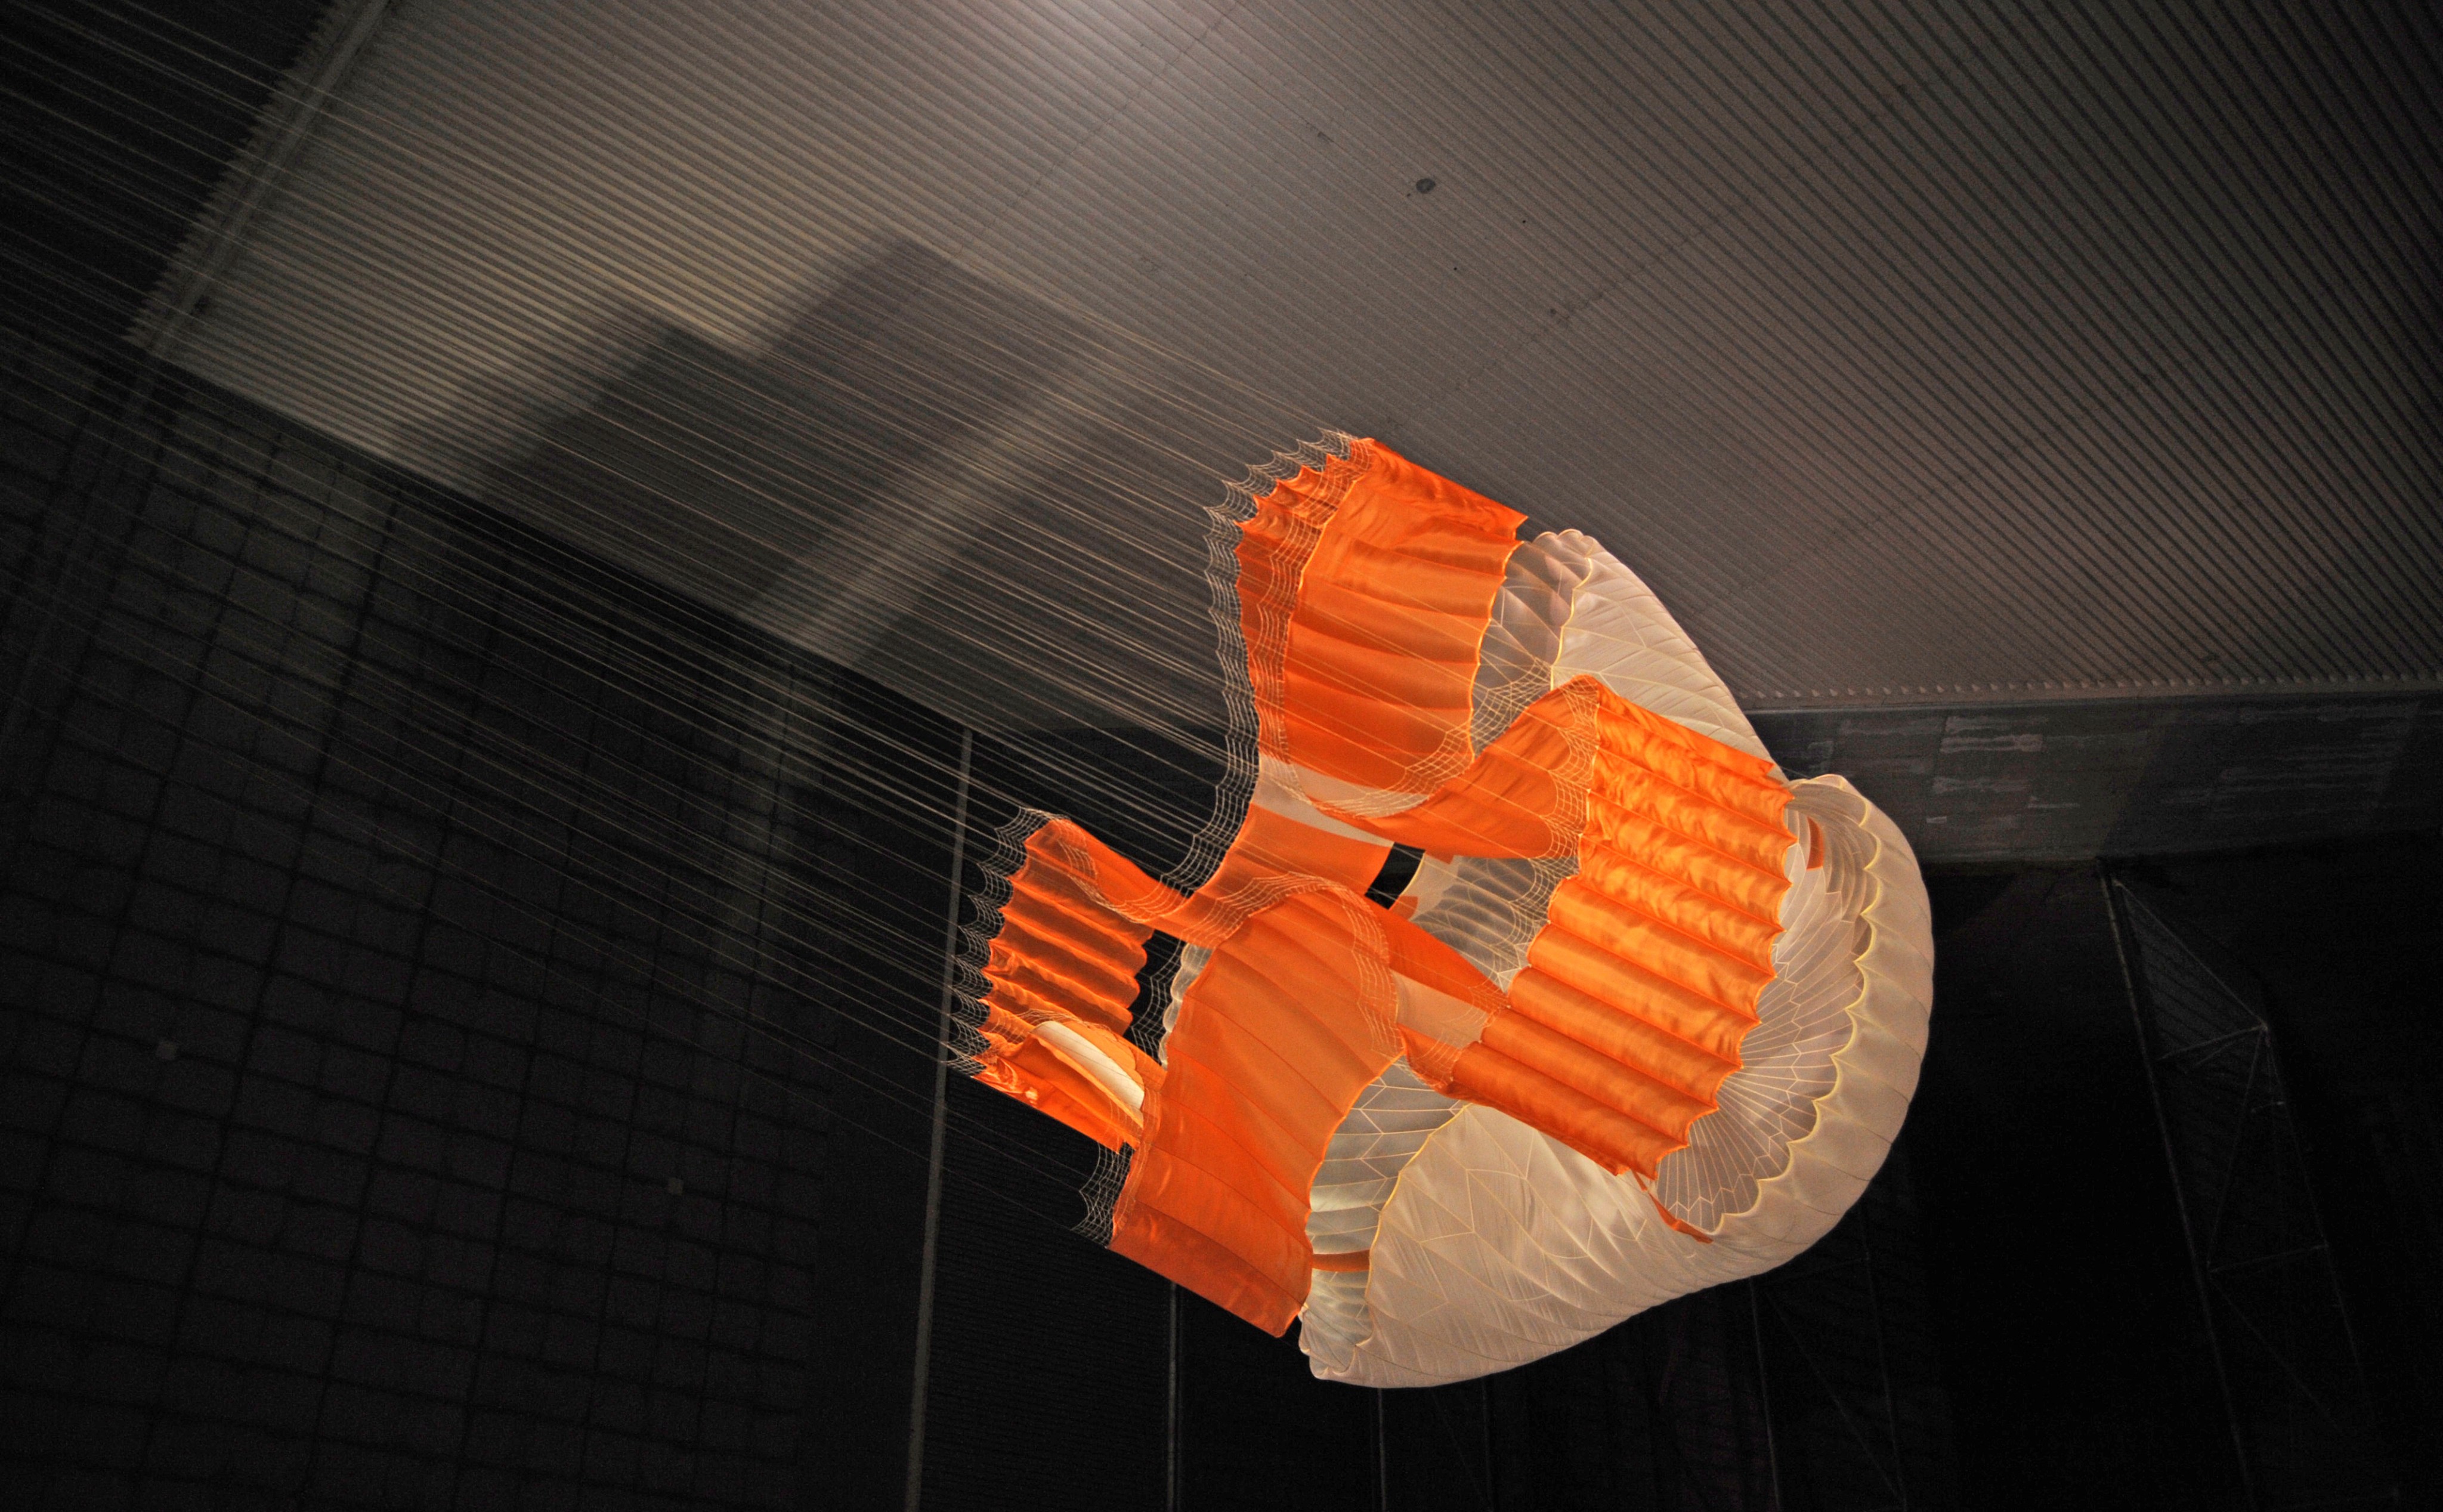 Parachute Opening During Tests for Mars Science Laboratory